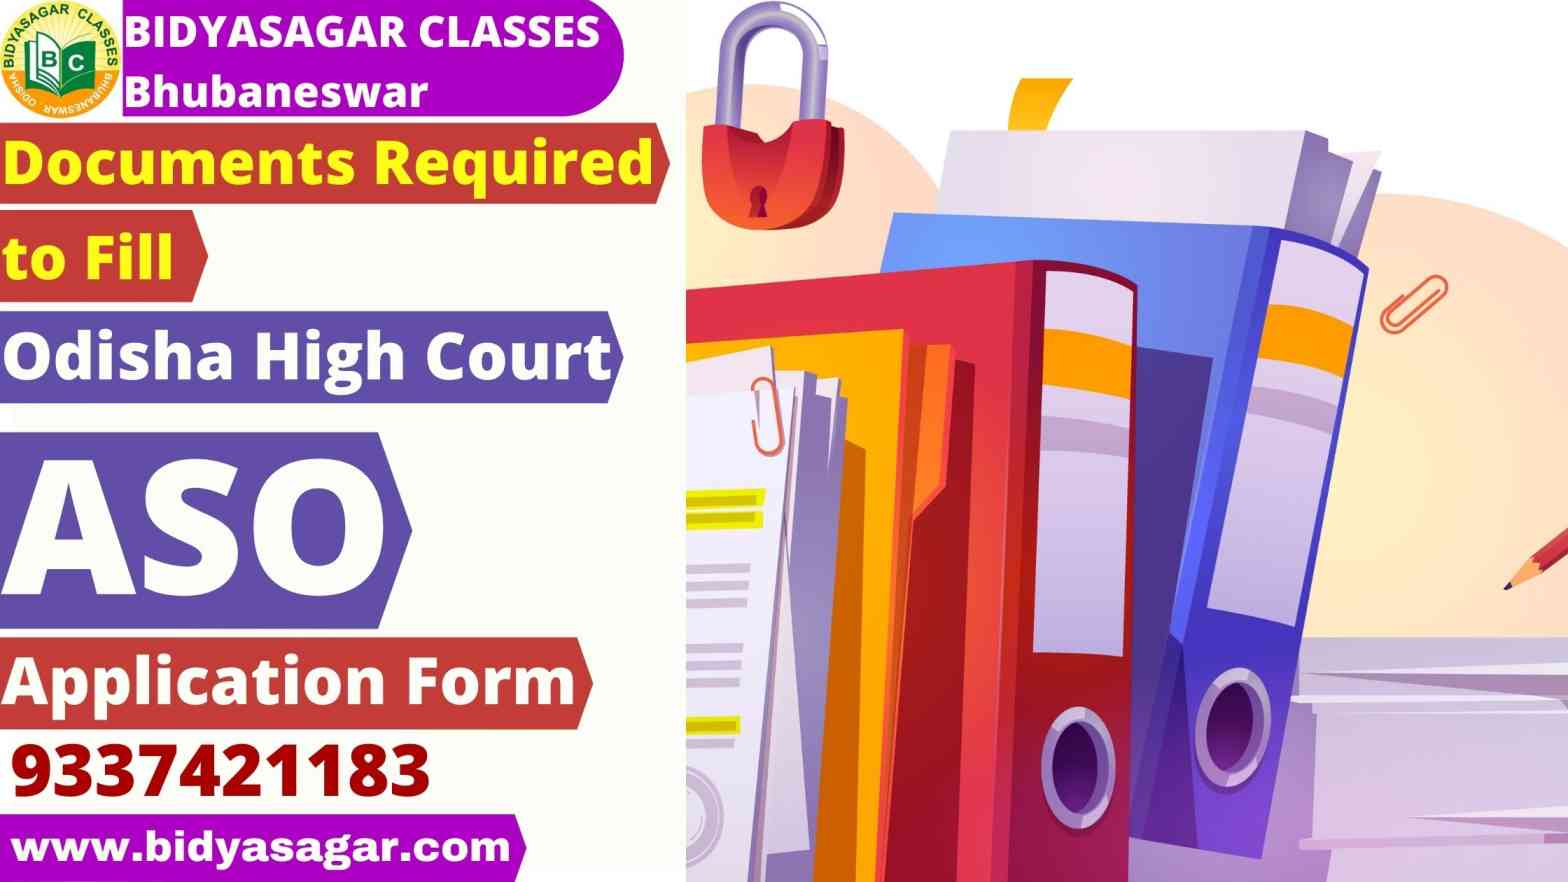 Documents Required To Fill Odisha High Court ASO Application Form